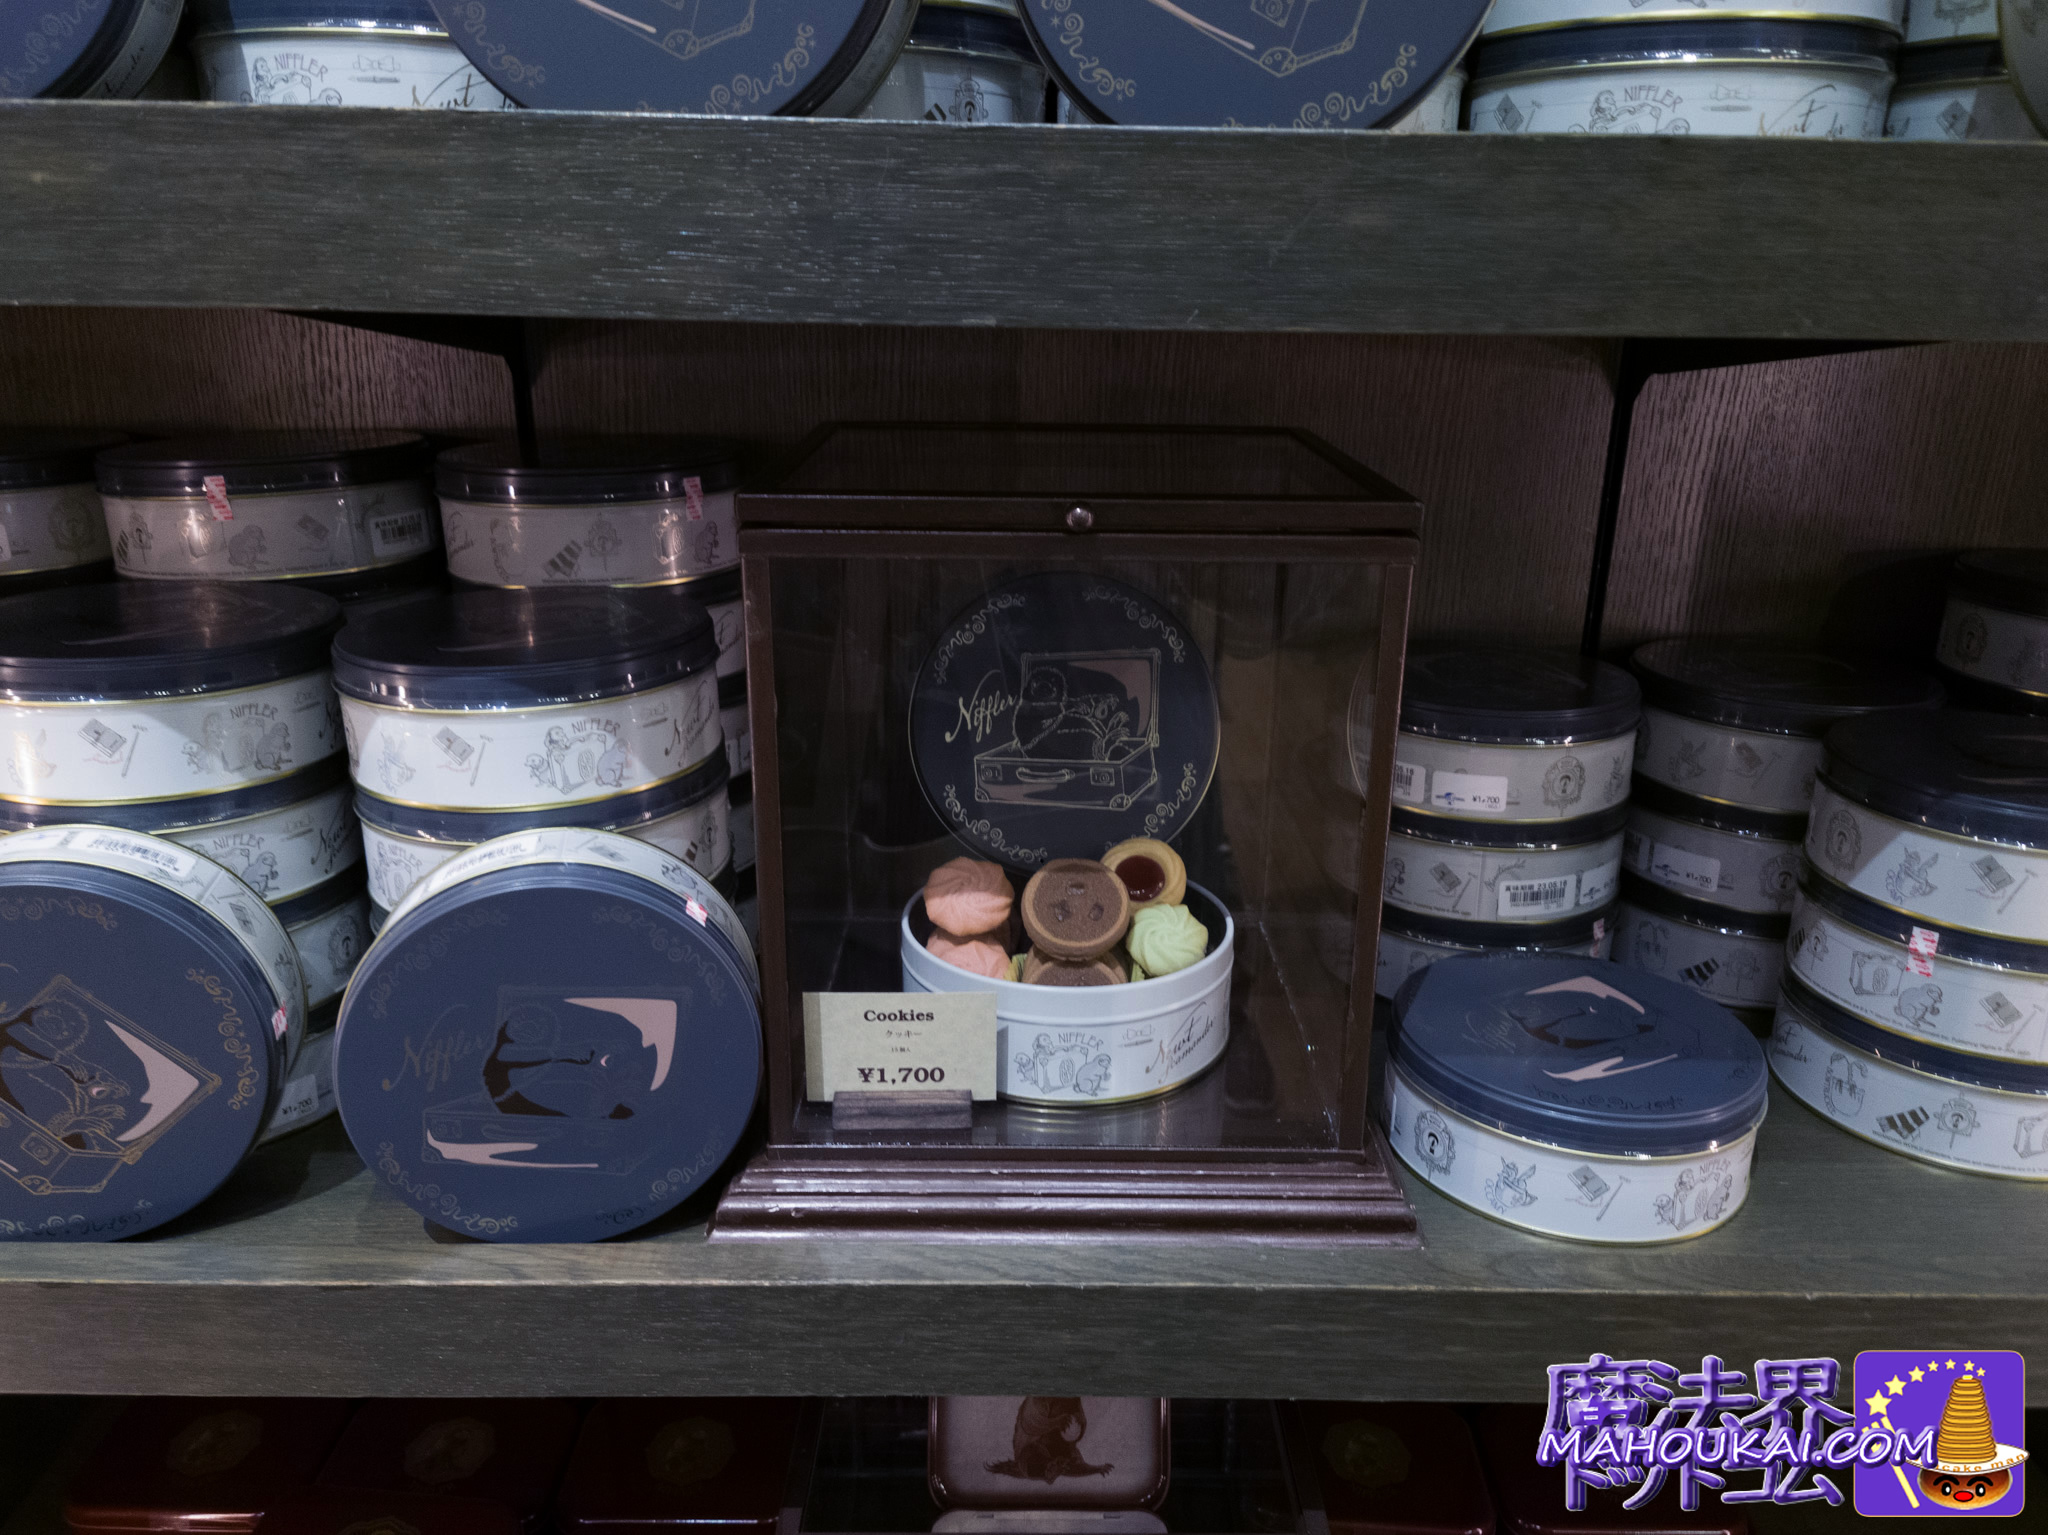 USJ Souvenirs: Fantabi-Niffler round tin biscuits, 5 types, set ｜ Harry Potter Area "Filch's Confiscated Goods Store" Out-of-area shop